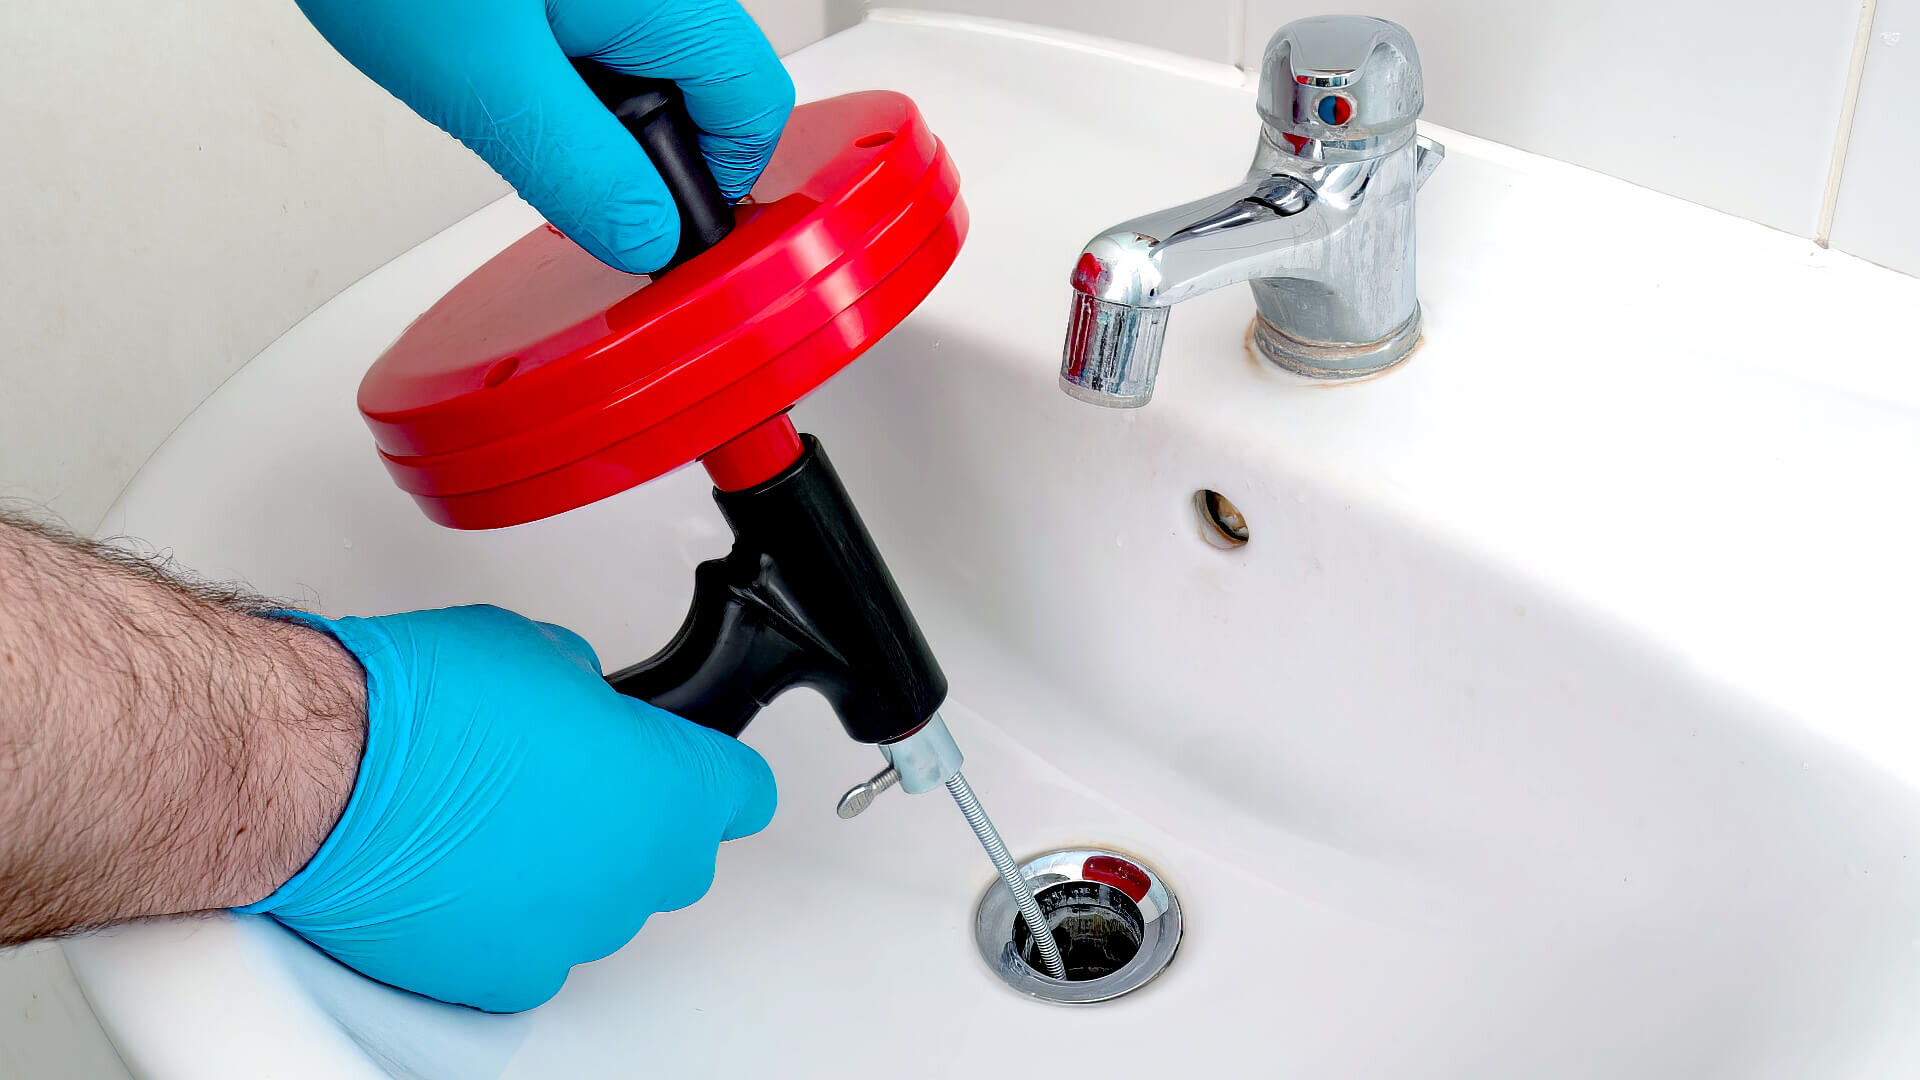 A Step-by-Step Guide on How to Use a Plumbing Snake to Unclog Drains